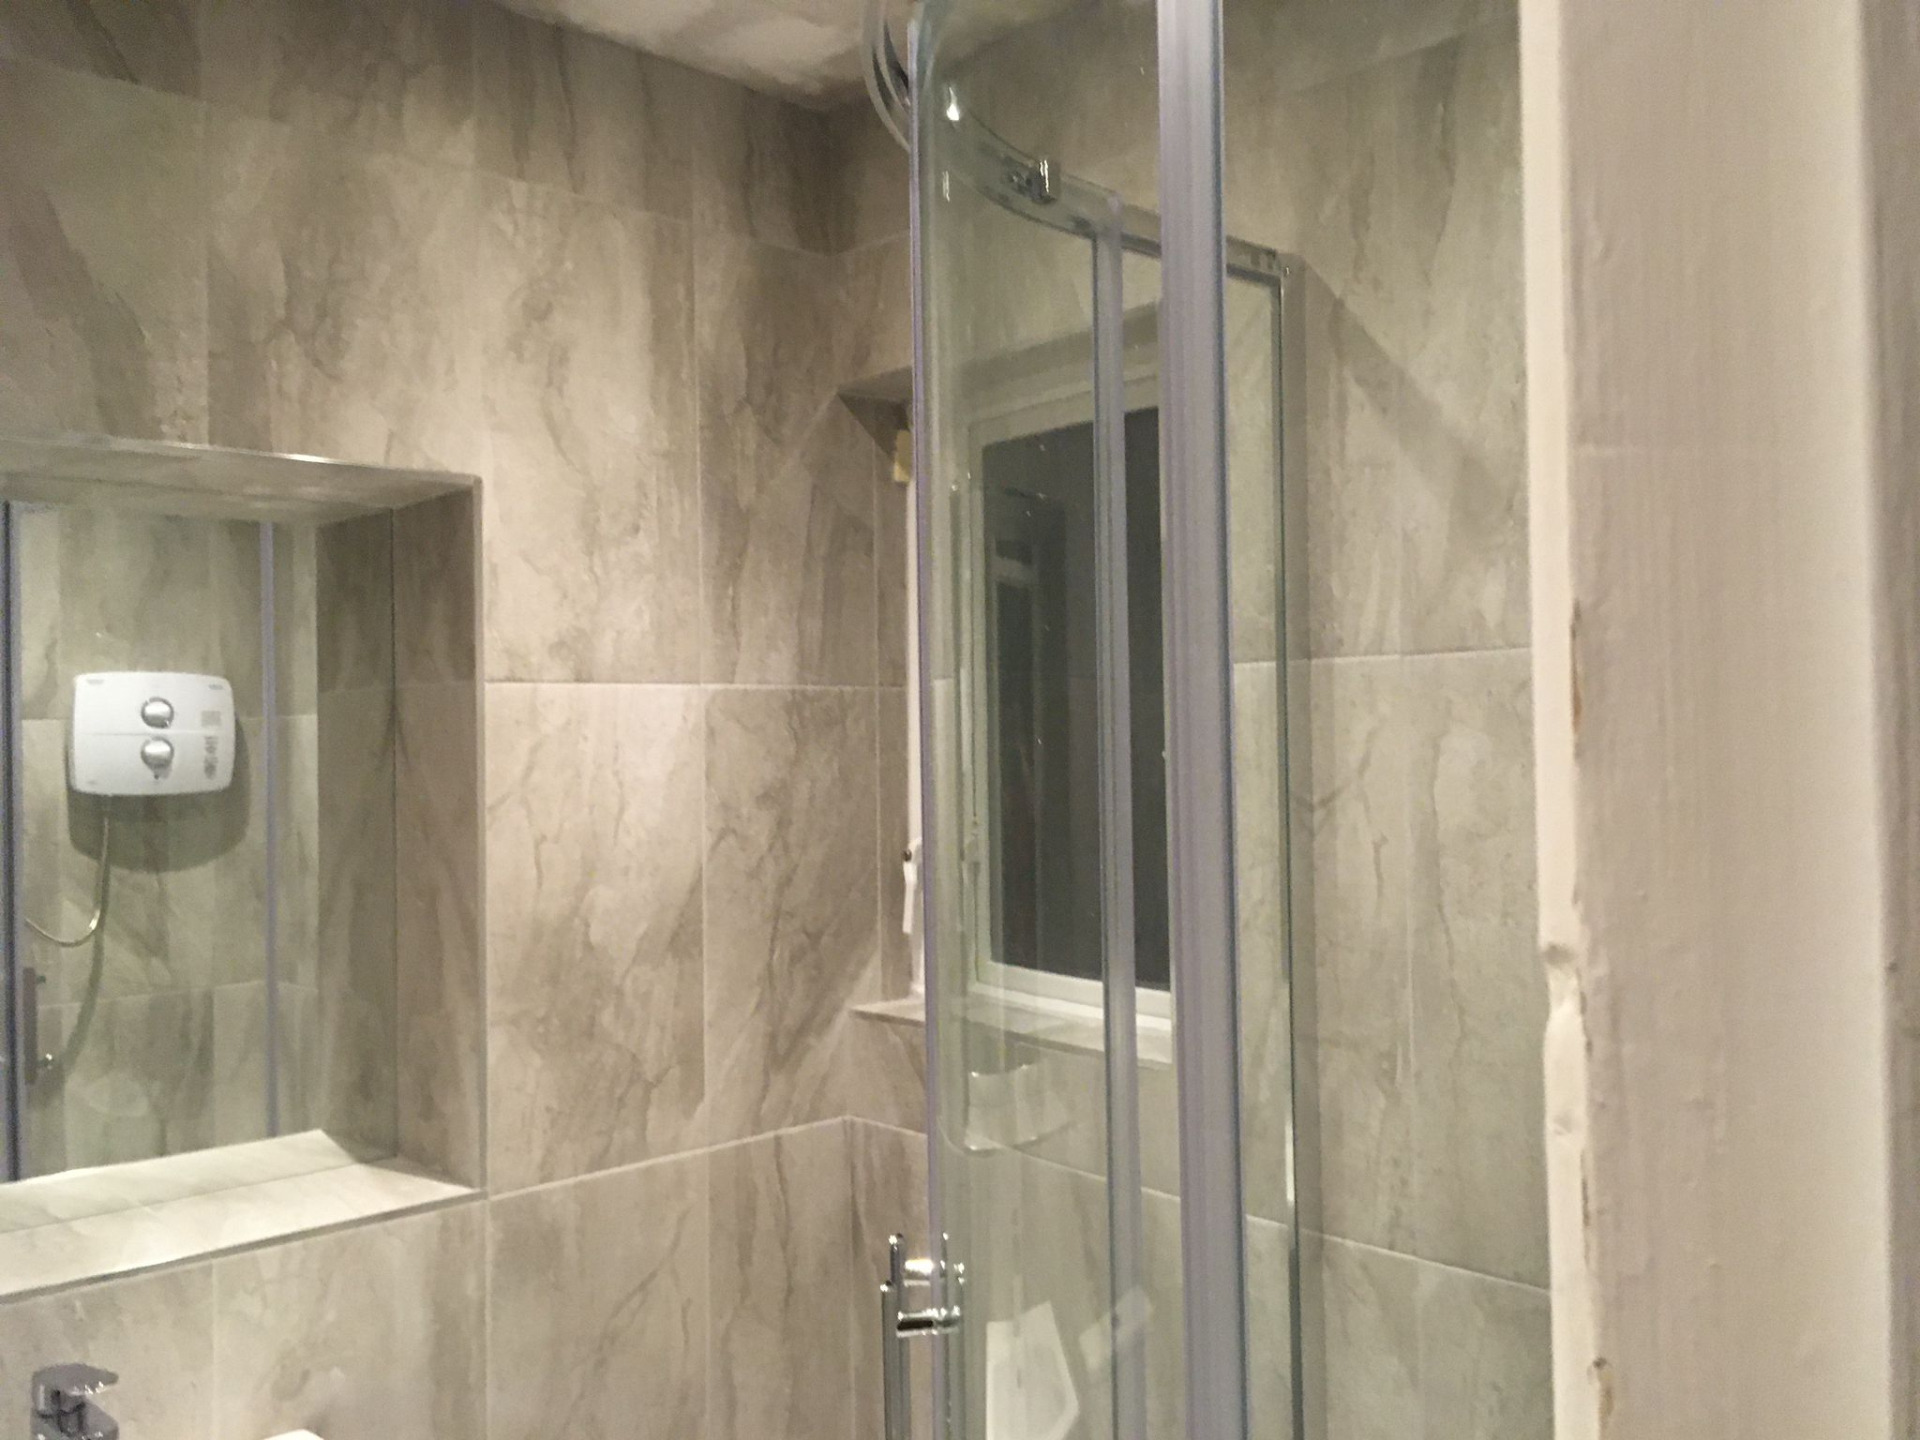 Floor to ceiling tiling with recessed shelf and mirror installed by Elite Building Services Swords